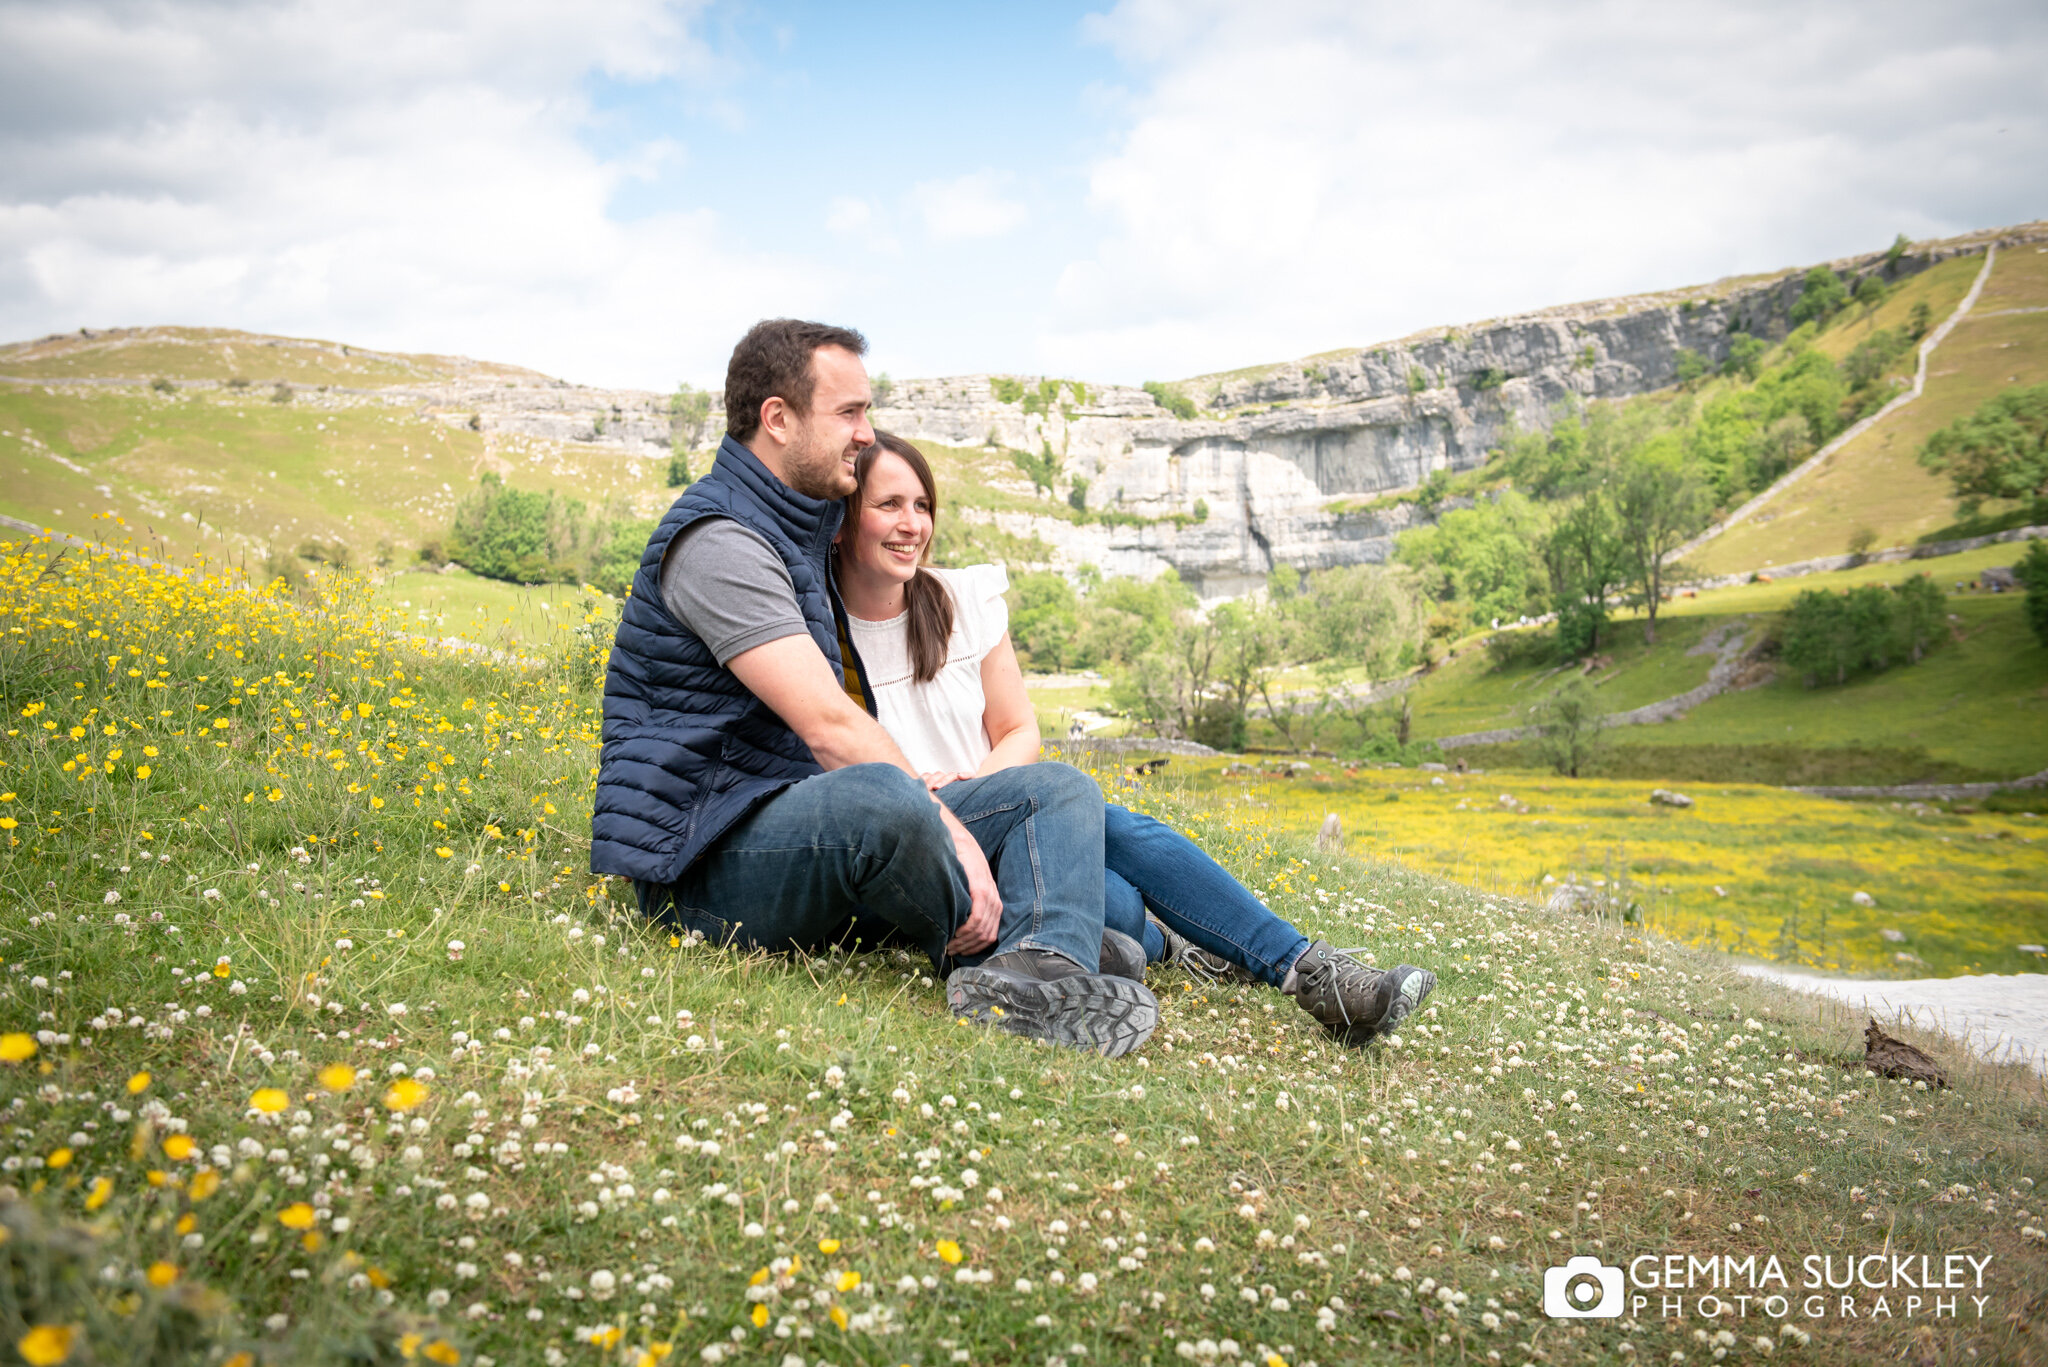 agn engaged couple sitting on the grass bear malham cove